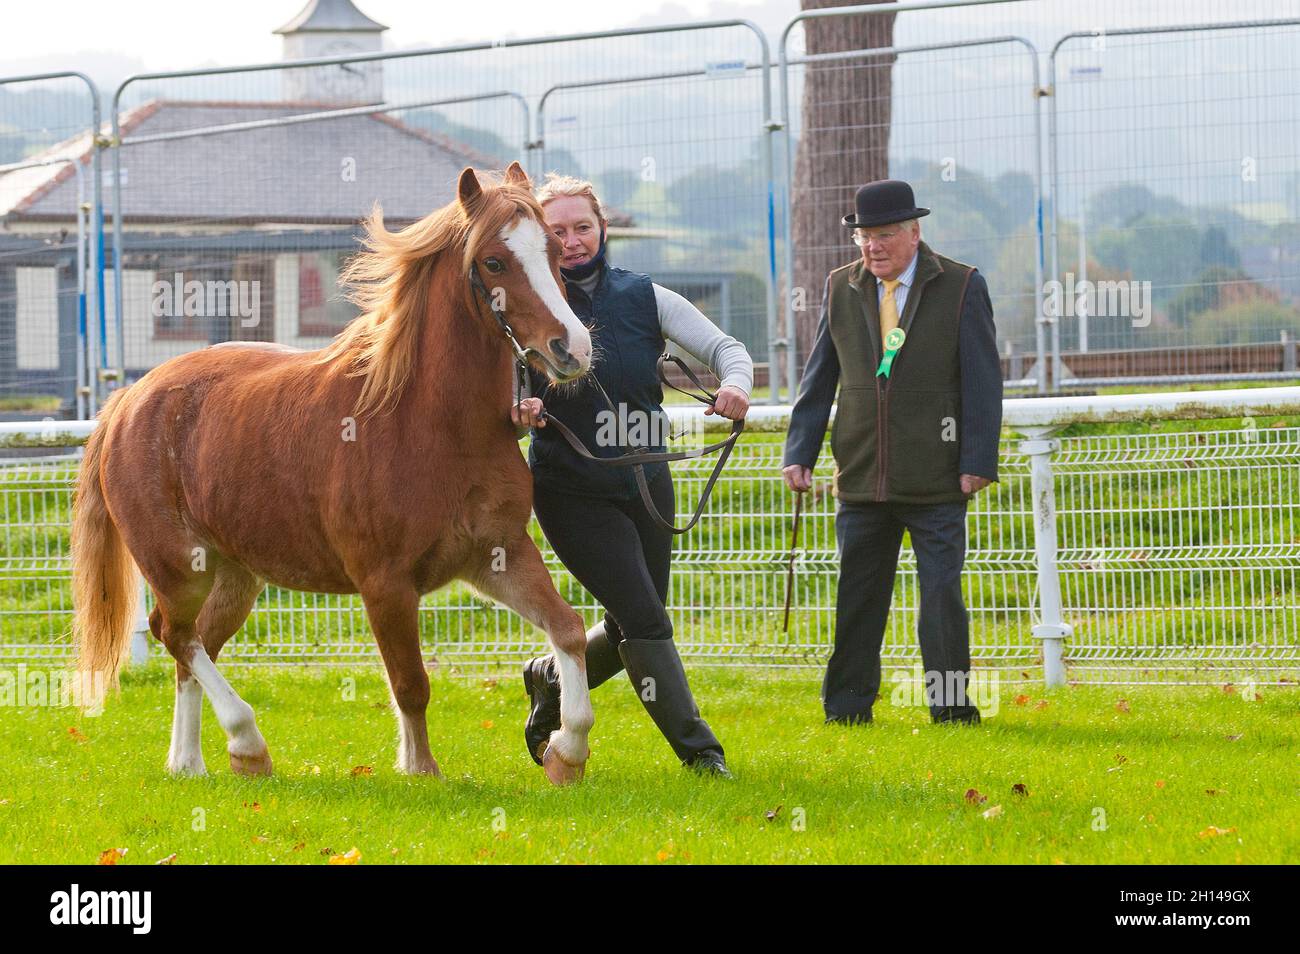 Llanelwedd, Powys, Wales, UK. 16th Oct, 2021. A gelding show takes place on the first day of the Welsh Pony & Cob sale. The Welsh Pony & Cob Society Official Sale, which has attracted 403 entries from the membership, is held by their official auctioneers McCartneys and takes place over two days at The Royal Welsh Showground in Llanelwedd, Powys, UK, attracting an audience of thousands of Welsh Pony & Cob enthusiasts worldwide. Credit: Graham M. Lawrence/Alamy Live News Stock Photo